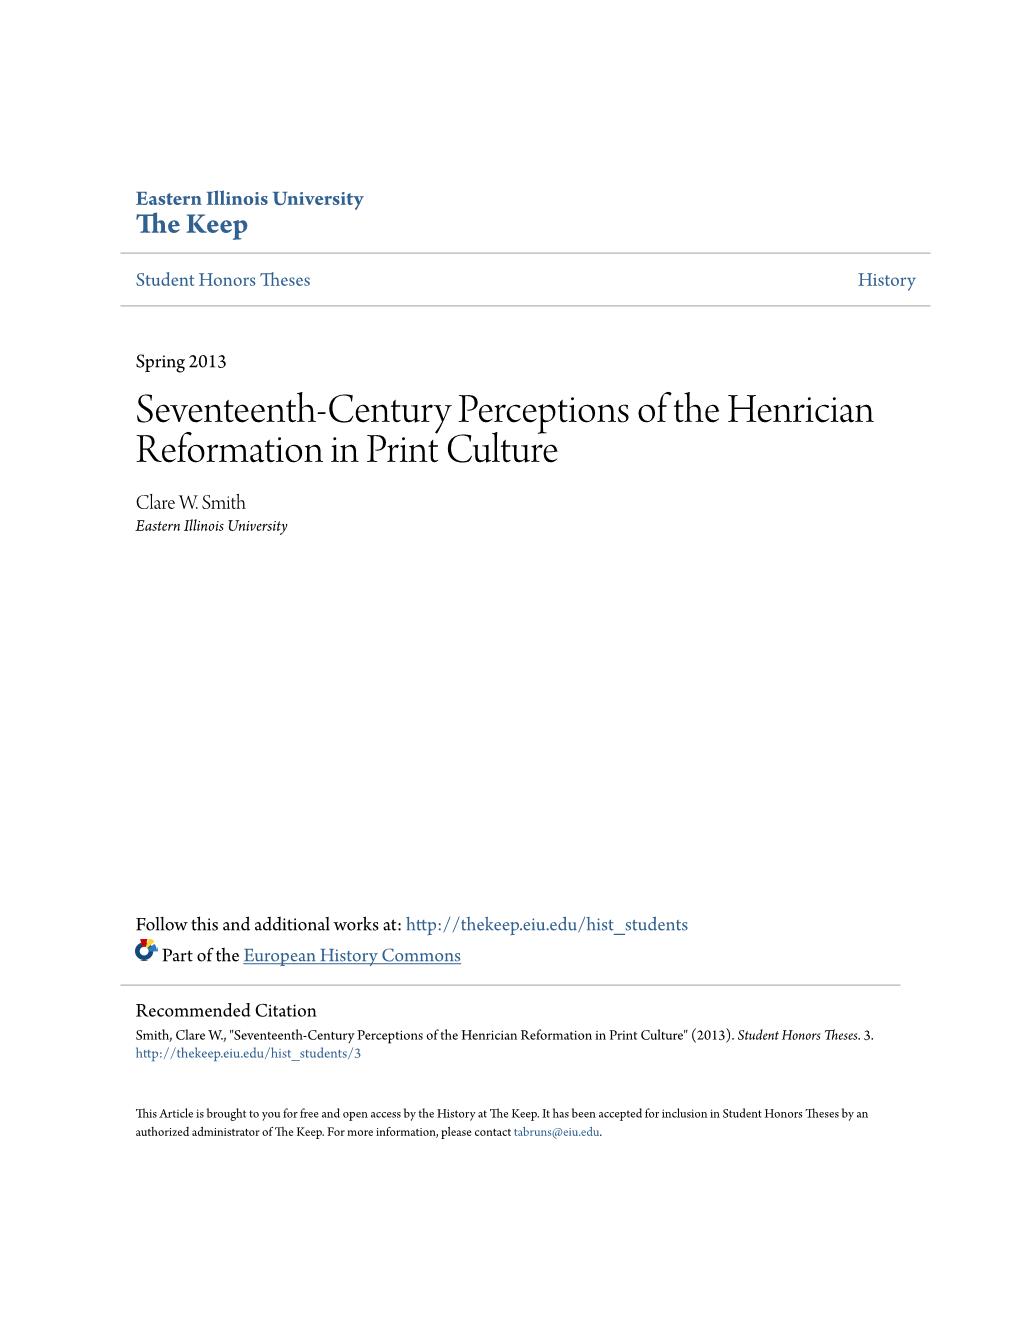 Seventeenth-Century Perceptions of the Henrician Reformation in Print Culture Clare W